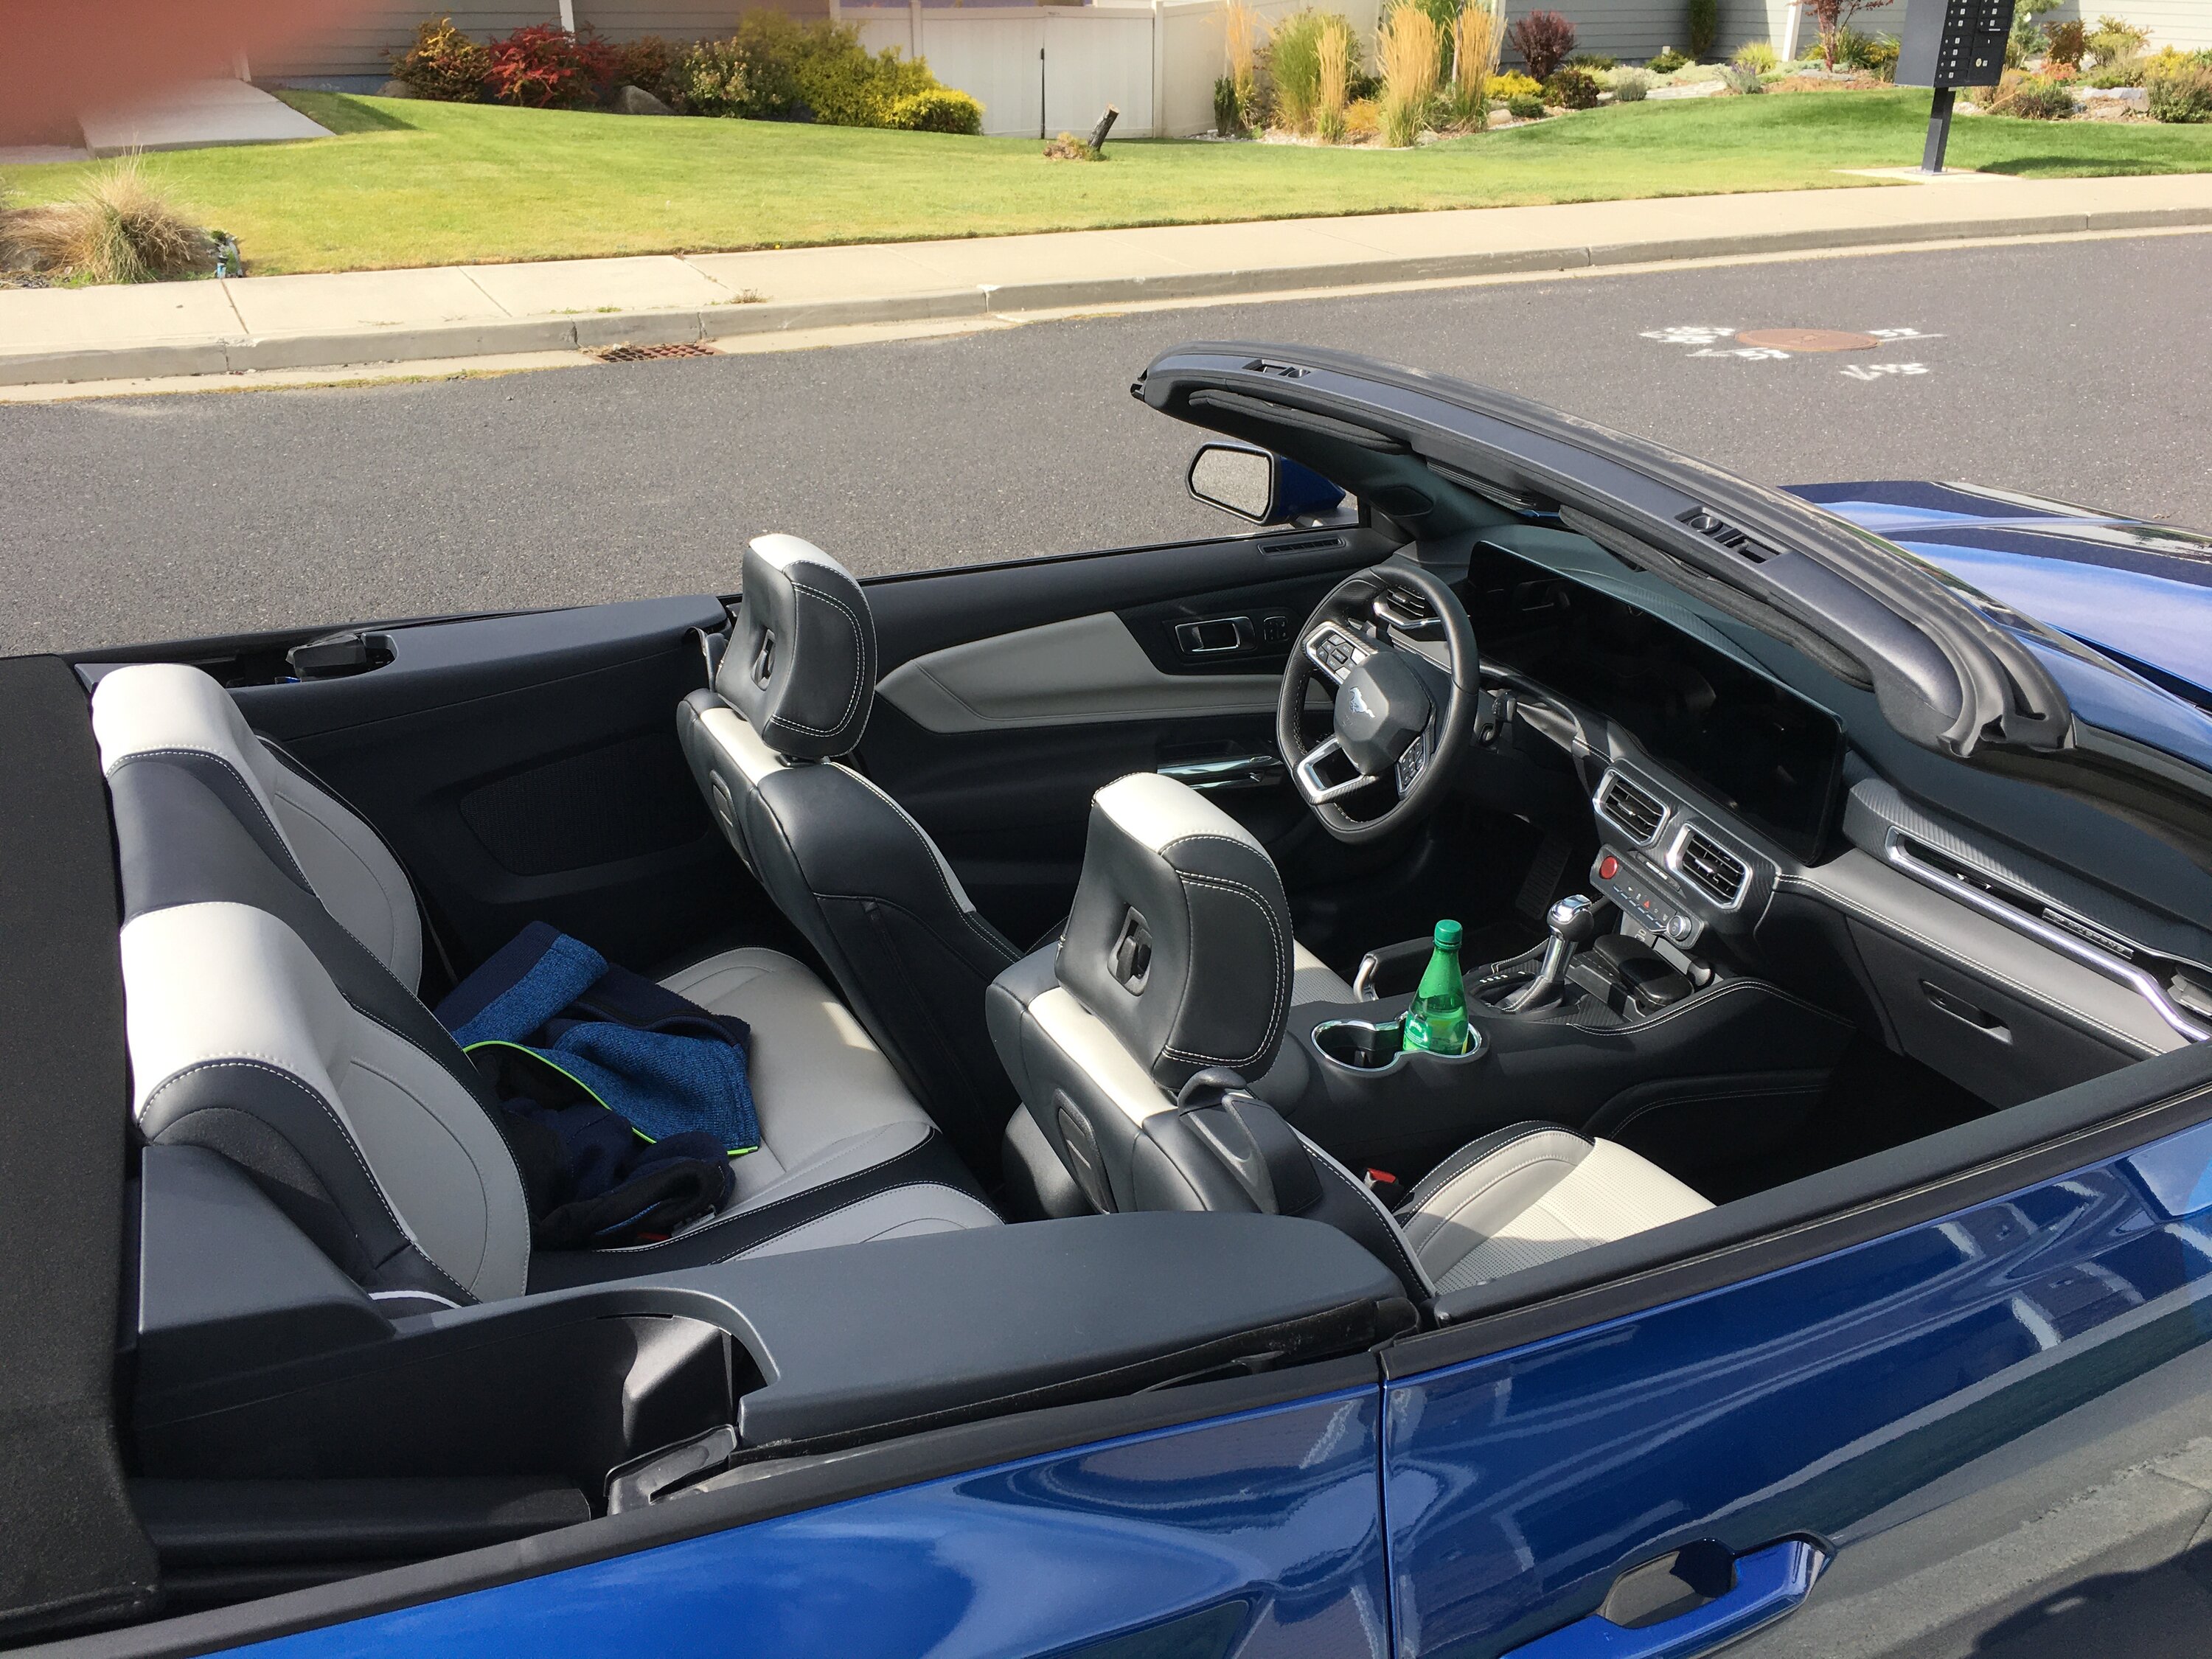 S650 Mustang Let’s post interior photos here! C23104C8-D79F-4155-91F0-84401623CDBF